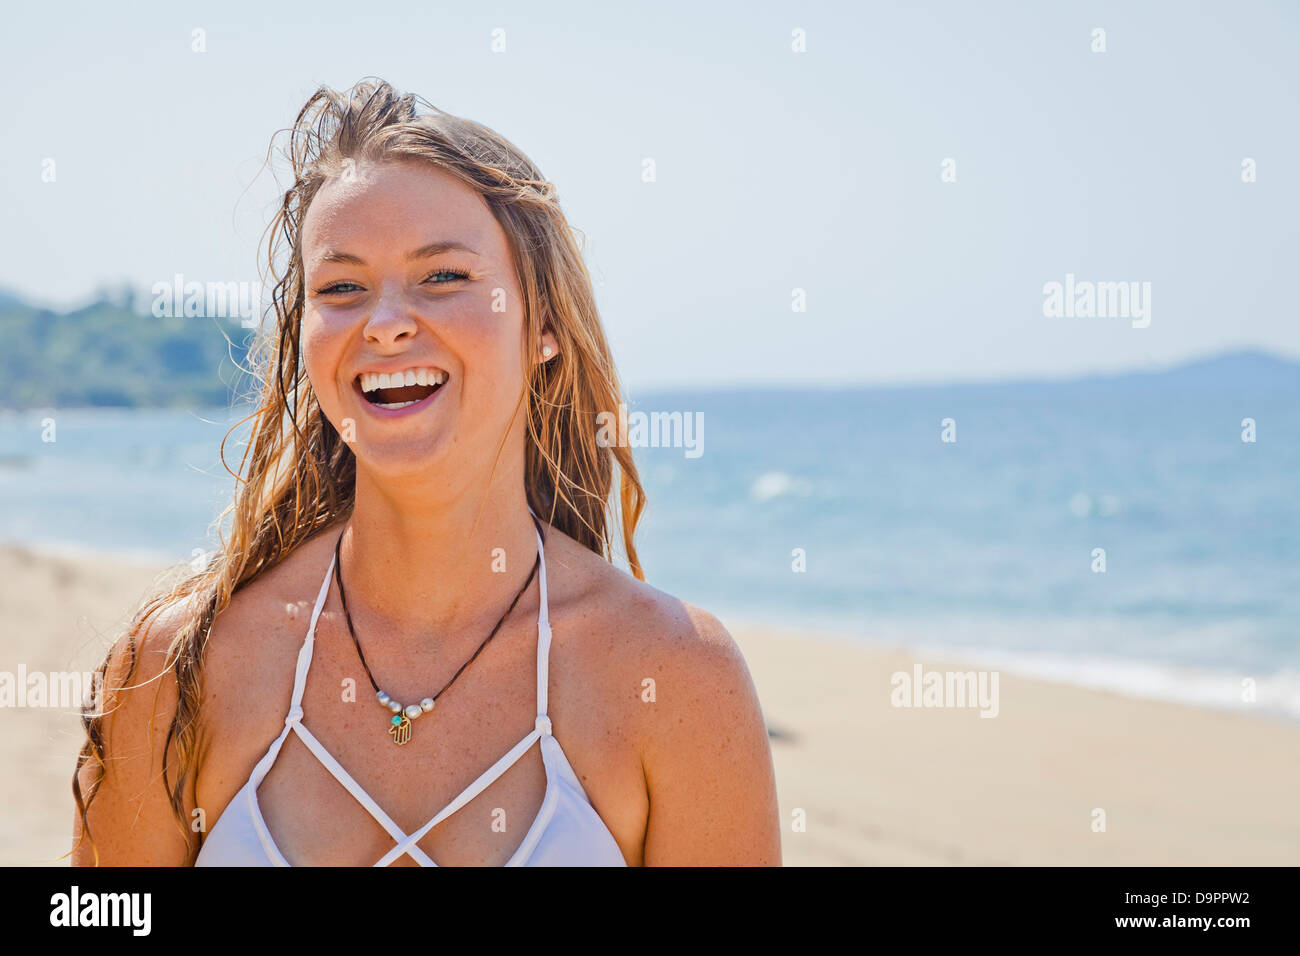 Portrait of young laughing woman on beach Banque D'Images